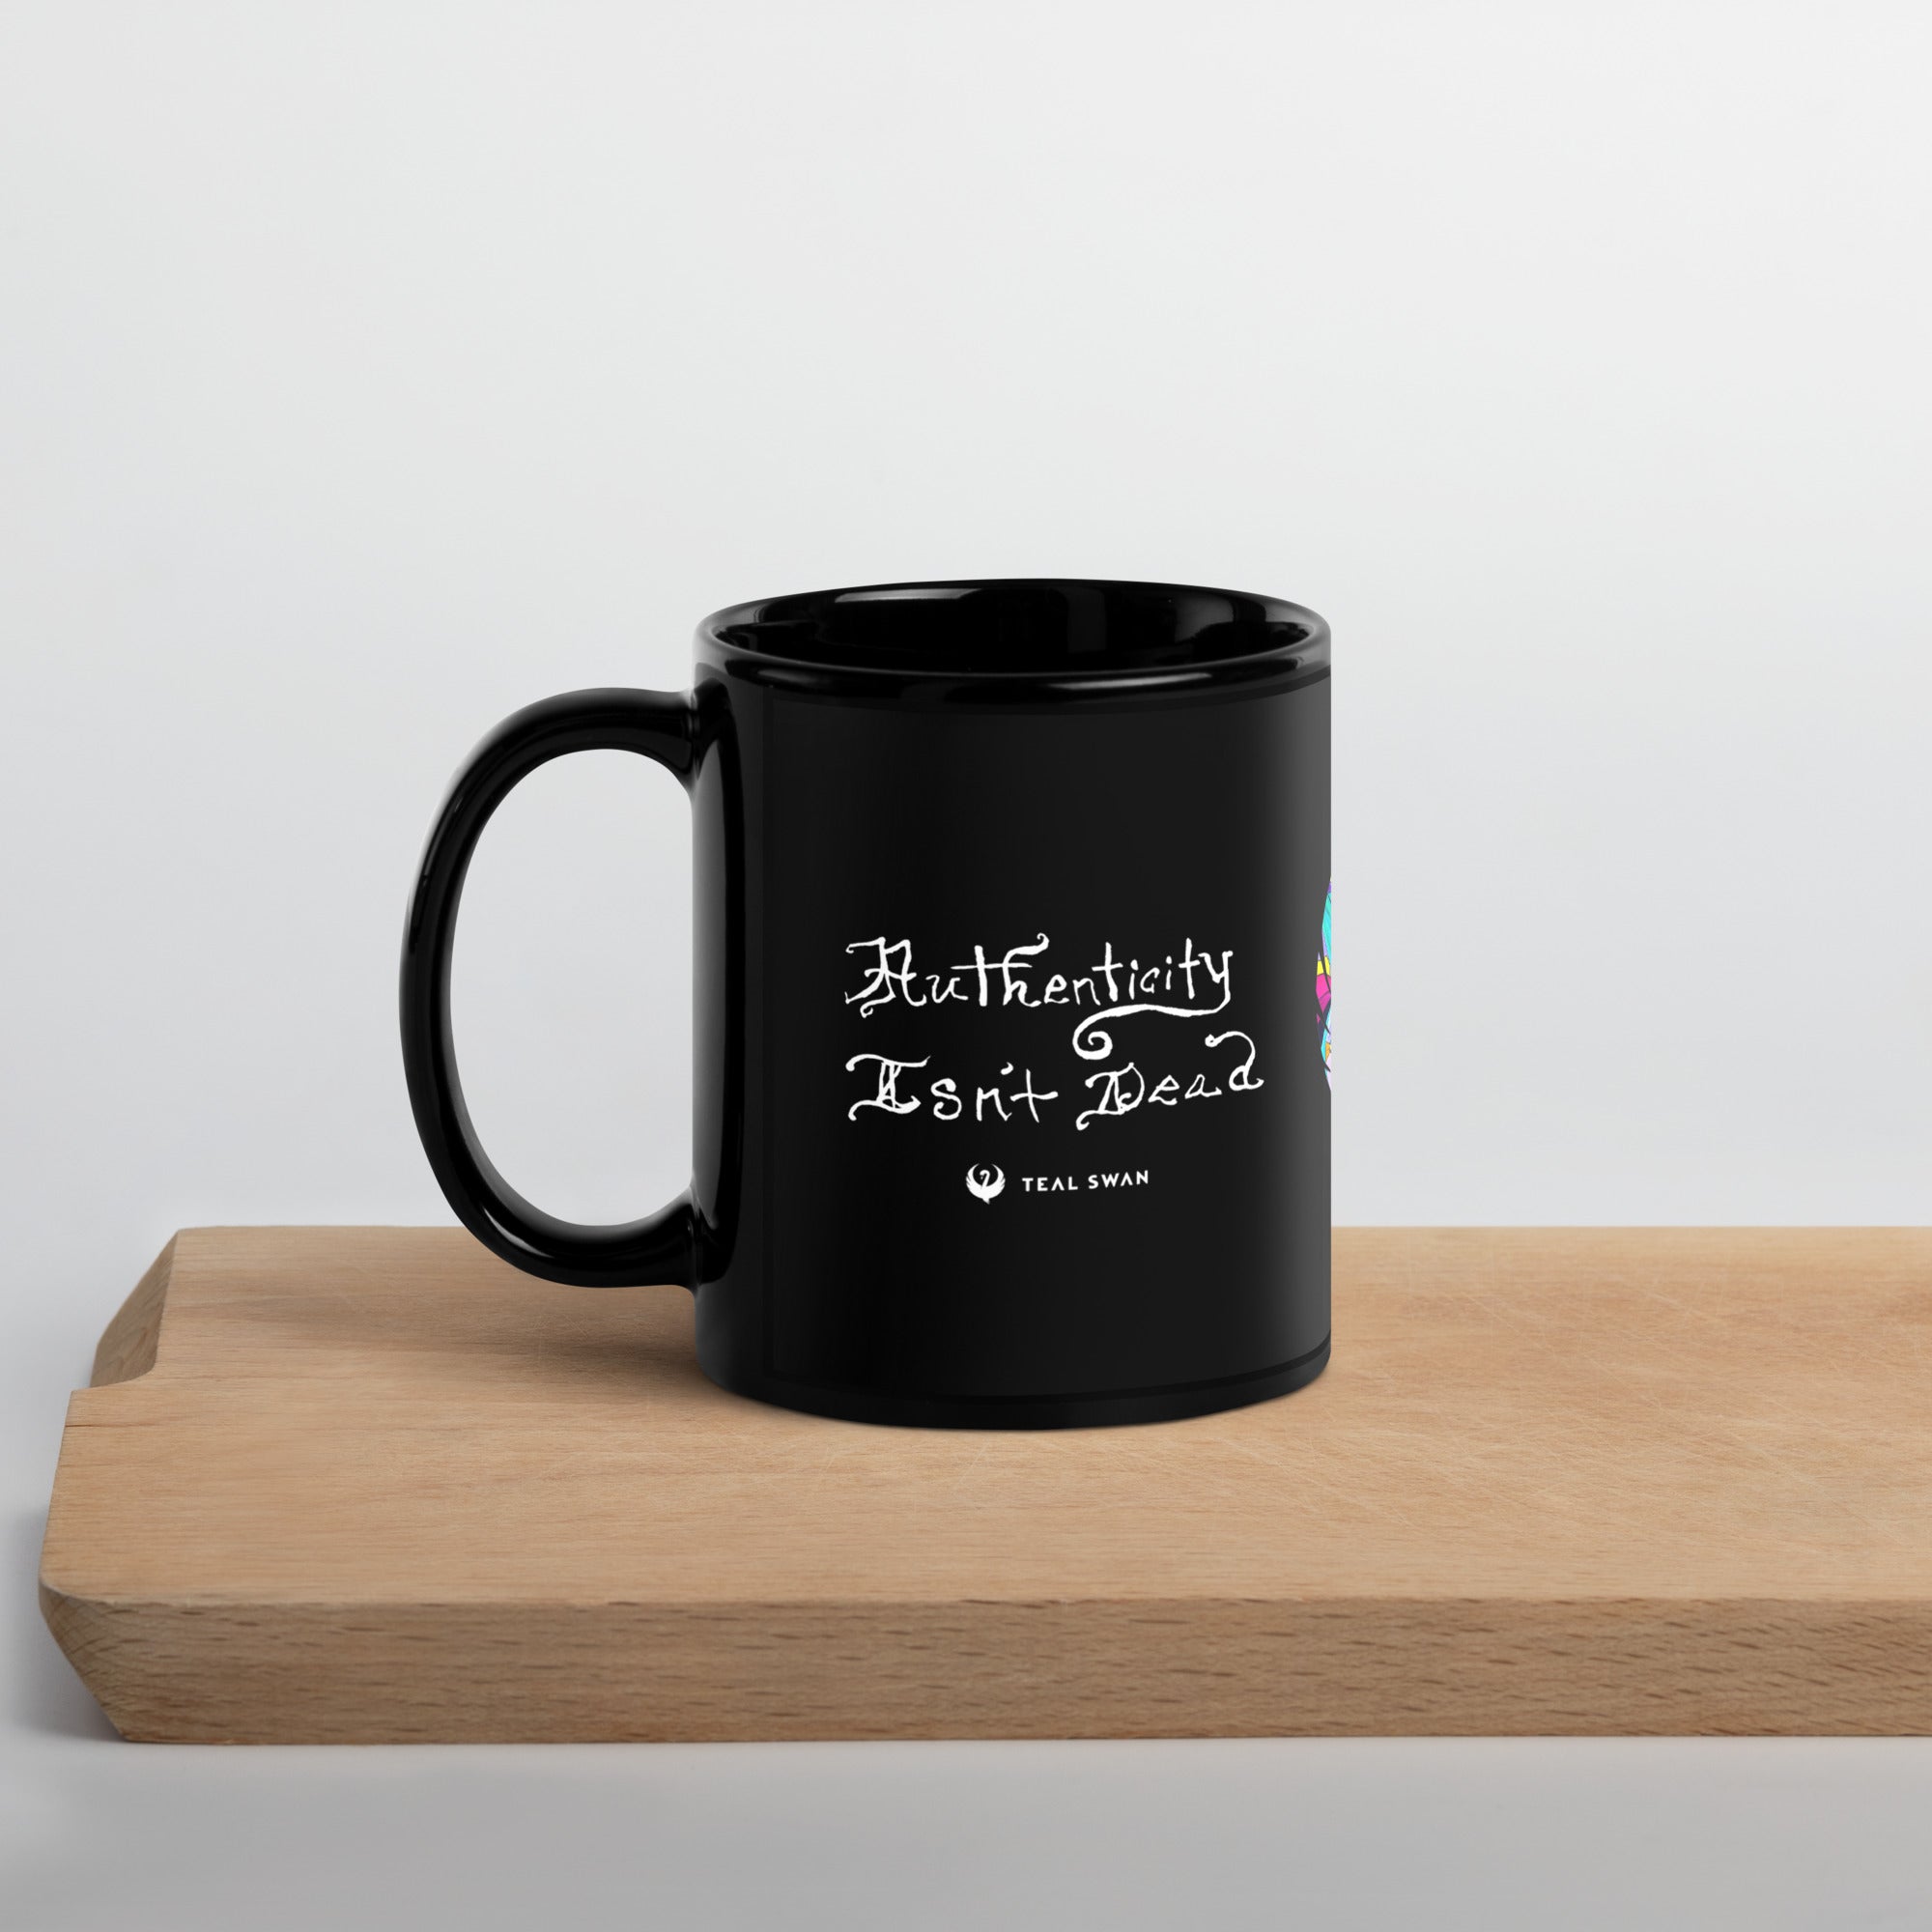 here-at-buy-authenticity-isnt-dead-quote-black-glossy-mug-online-now_2.jpg